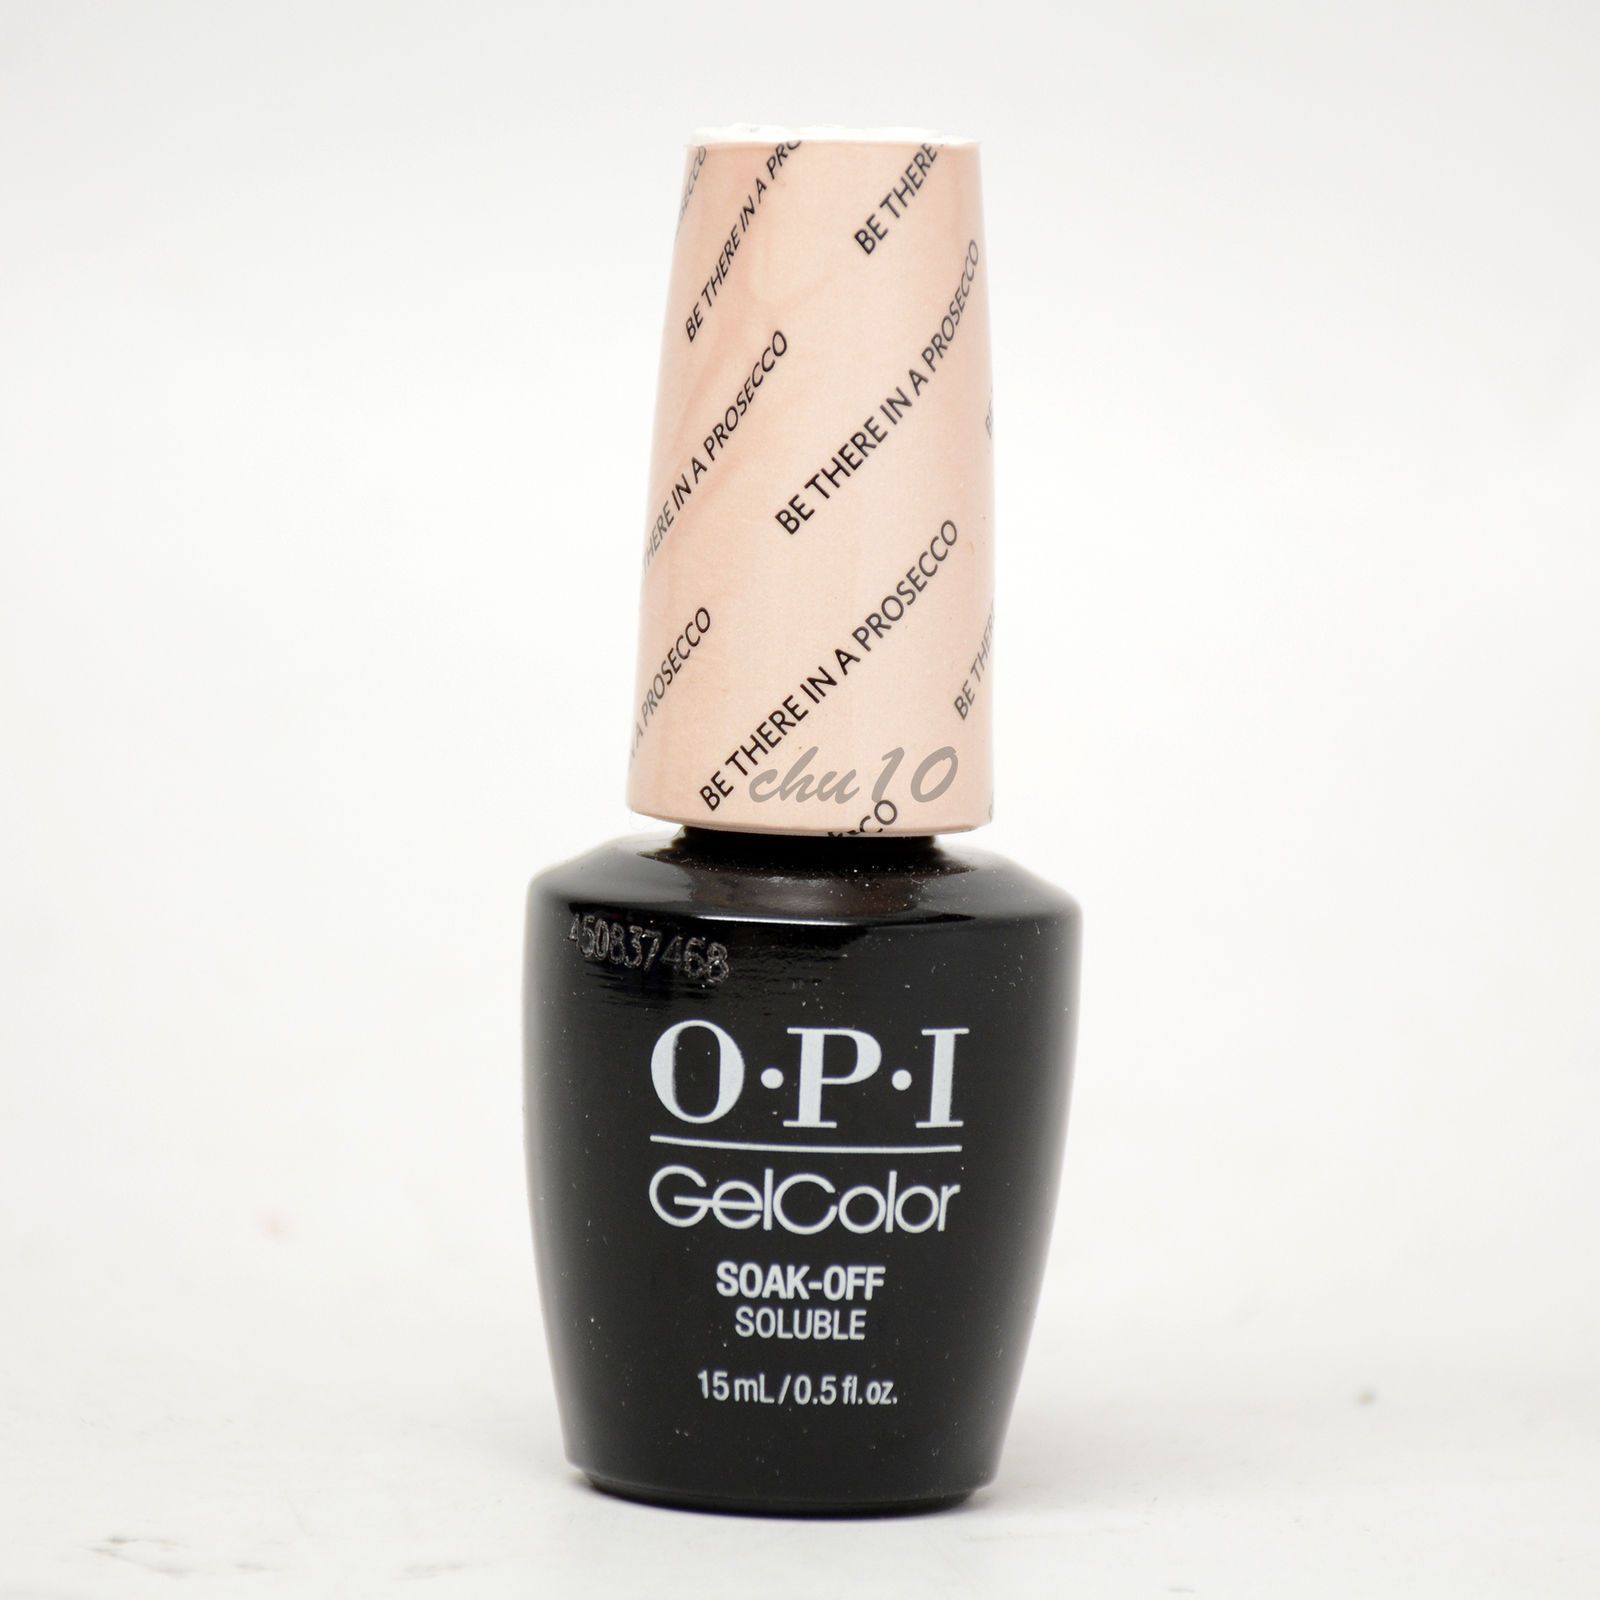 OPI Gel Color Be There in a Prosecco V31 - $17.49